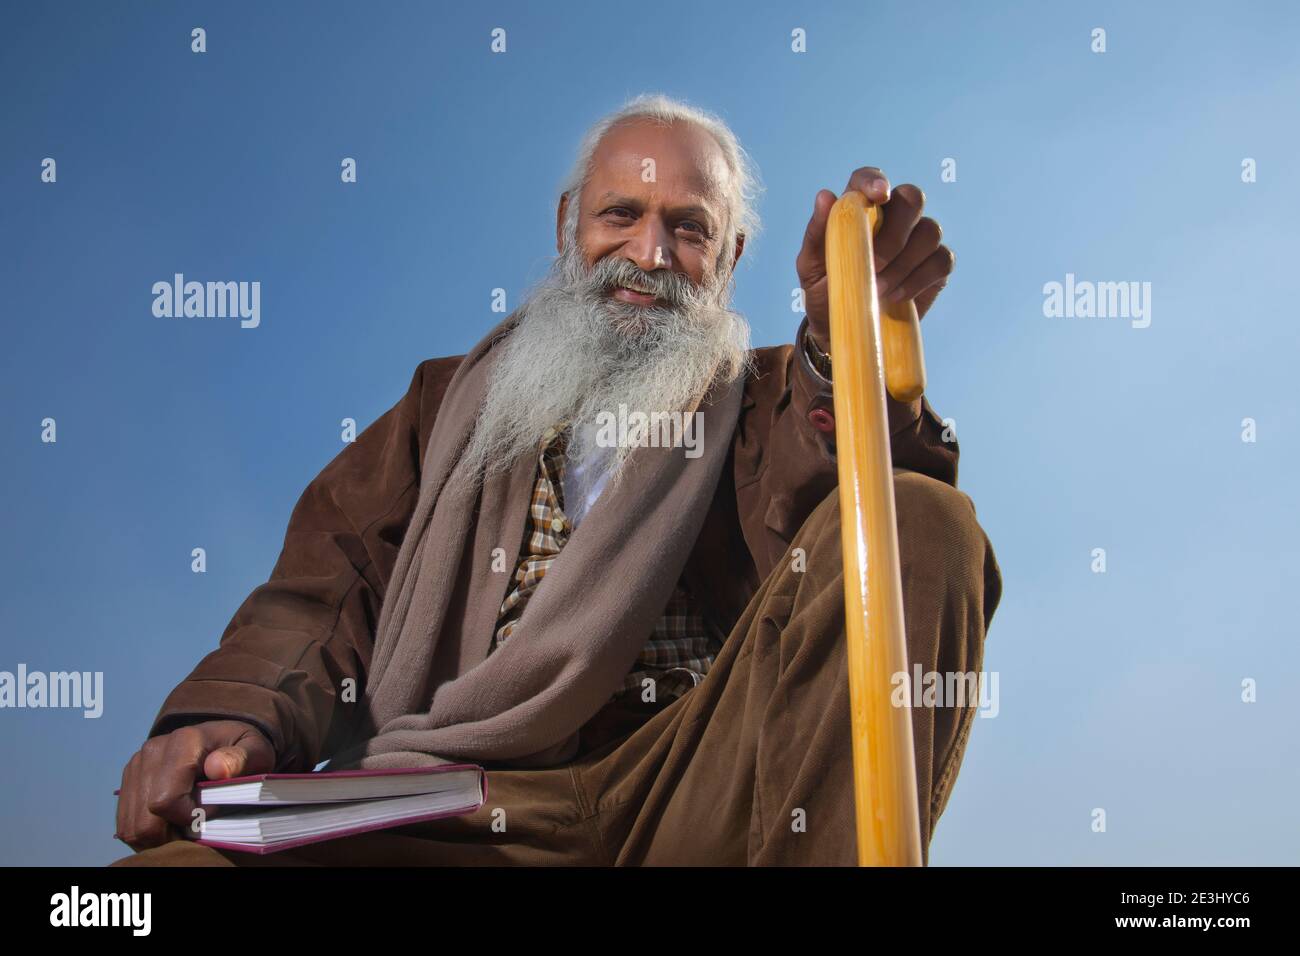 AN OLD MAN SITTING WITH BOOK HOLDING STICK SMILING AND LOOKING AT CAMERA Stock Photo